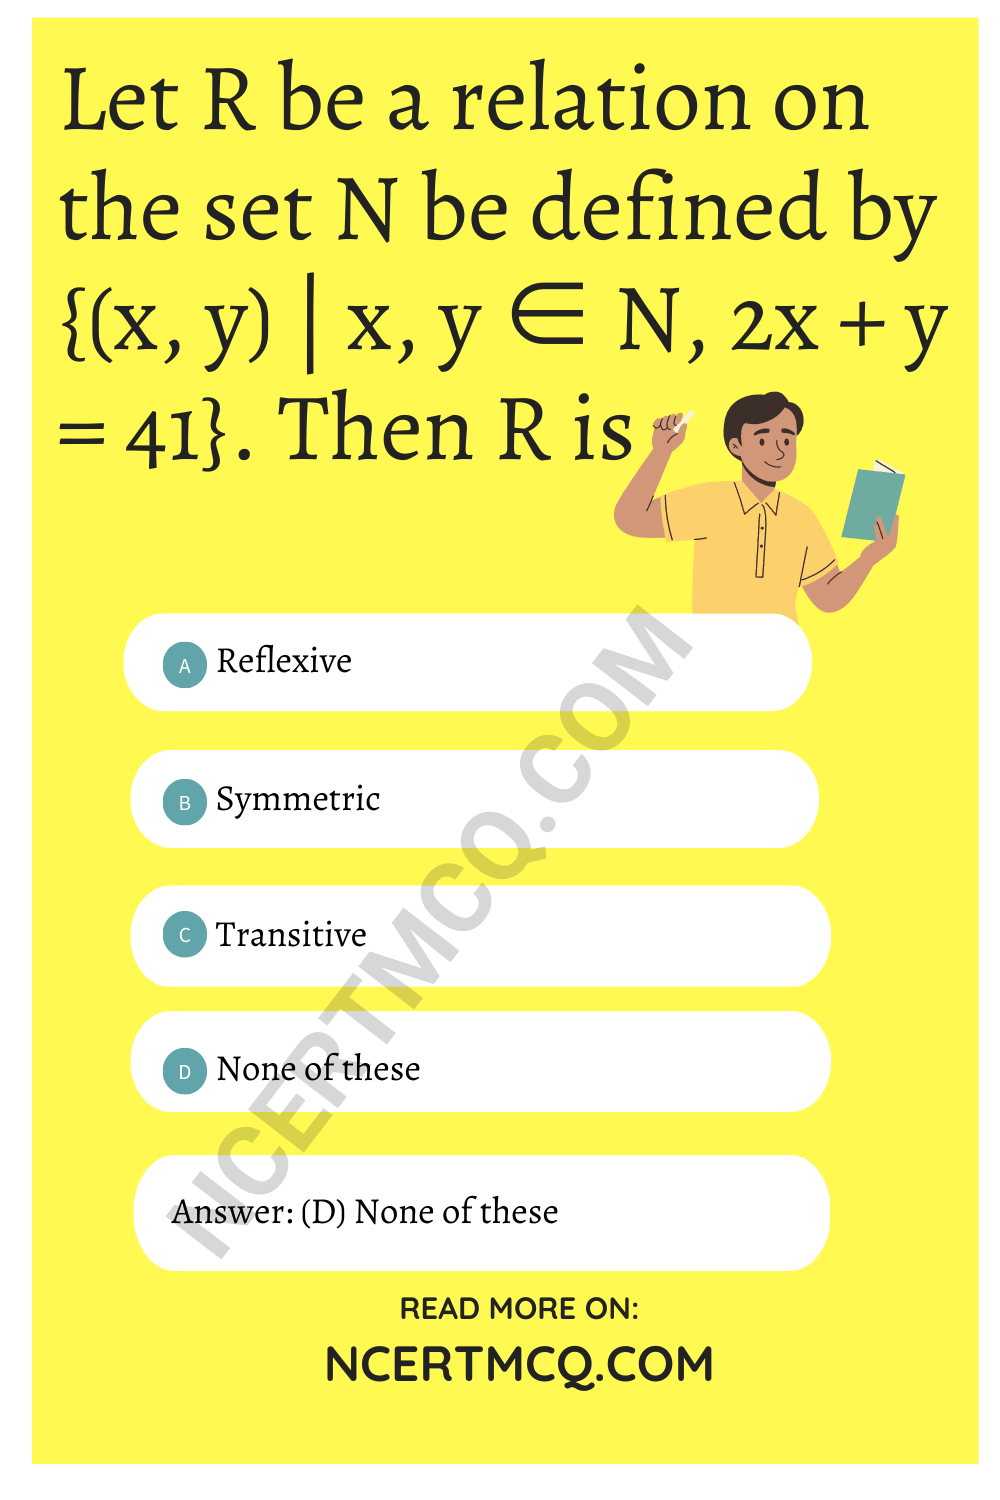 Let R be a relation on the set N be defined by {(x, y) | x, y ∈ N, 2x + y = 41}. Then R is